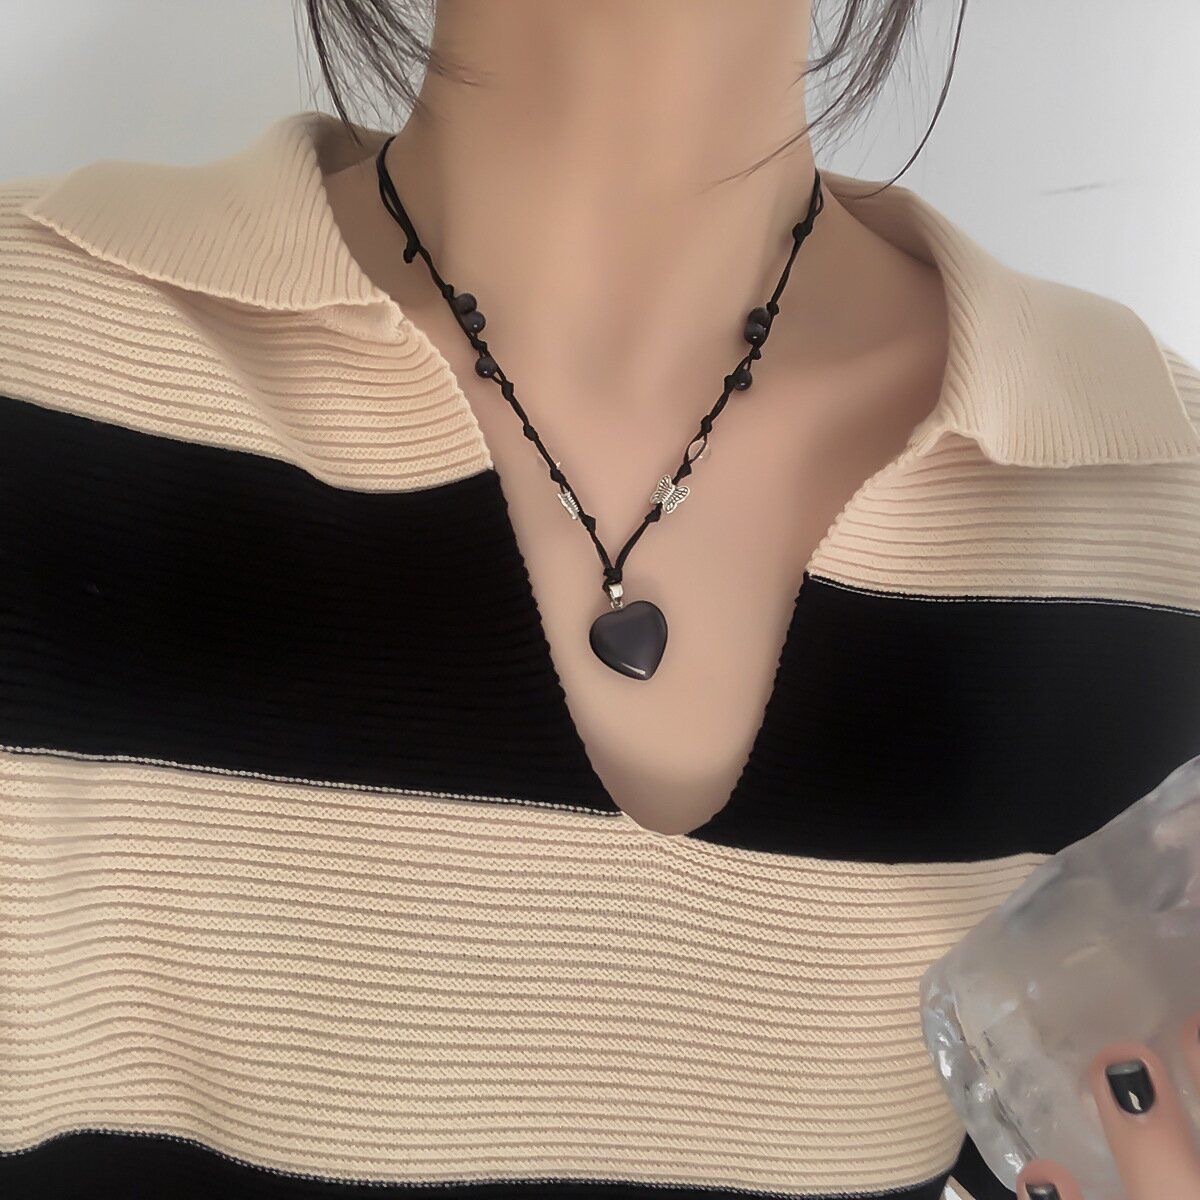 INS Korean Niche Design Beaded Love Necklace Dark Butterfly Sweet Cool Style Light Luxury Adjustable Clavicle Chain